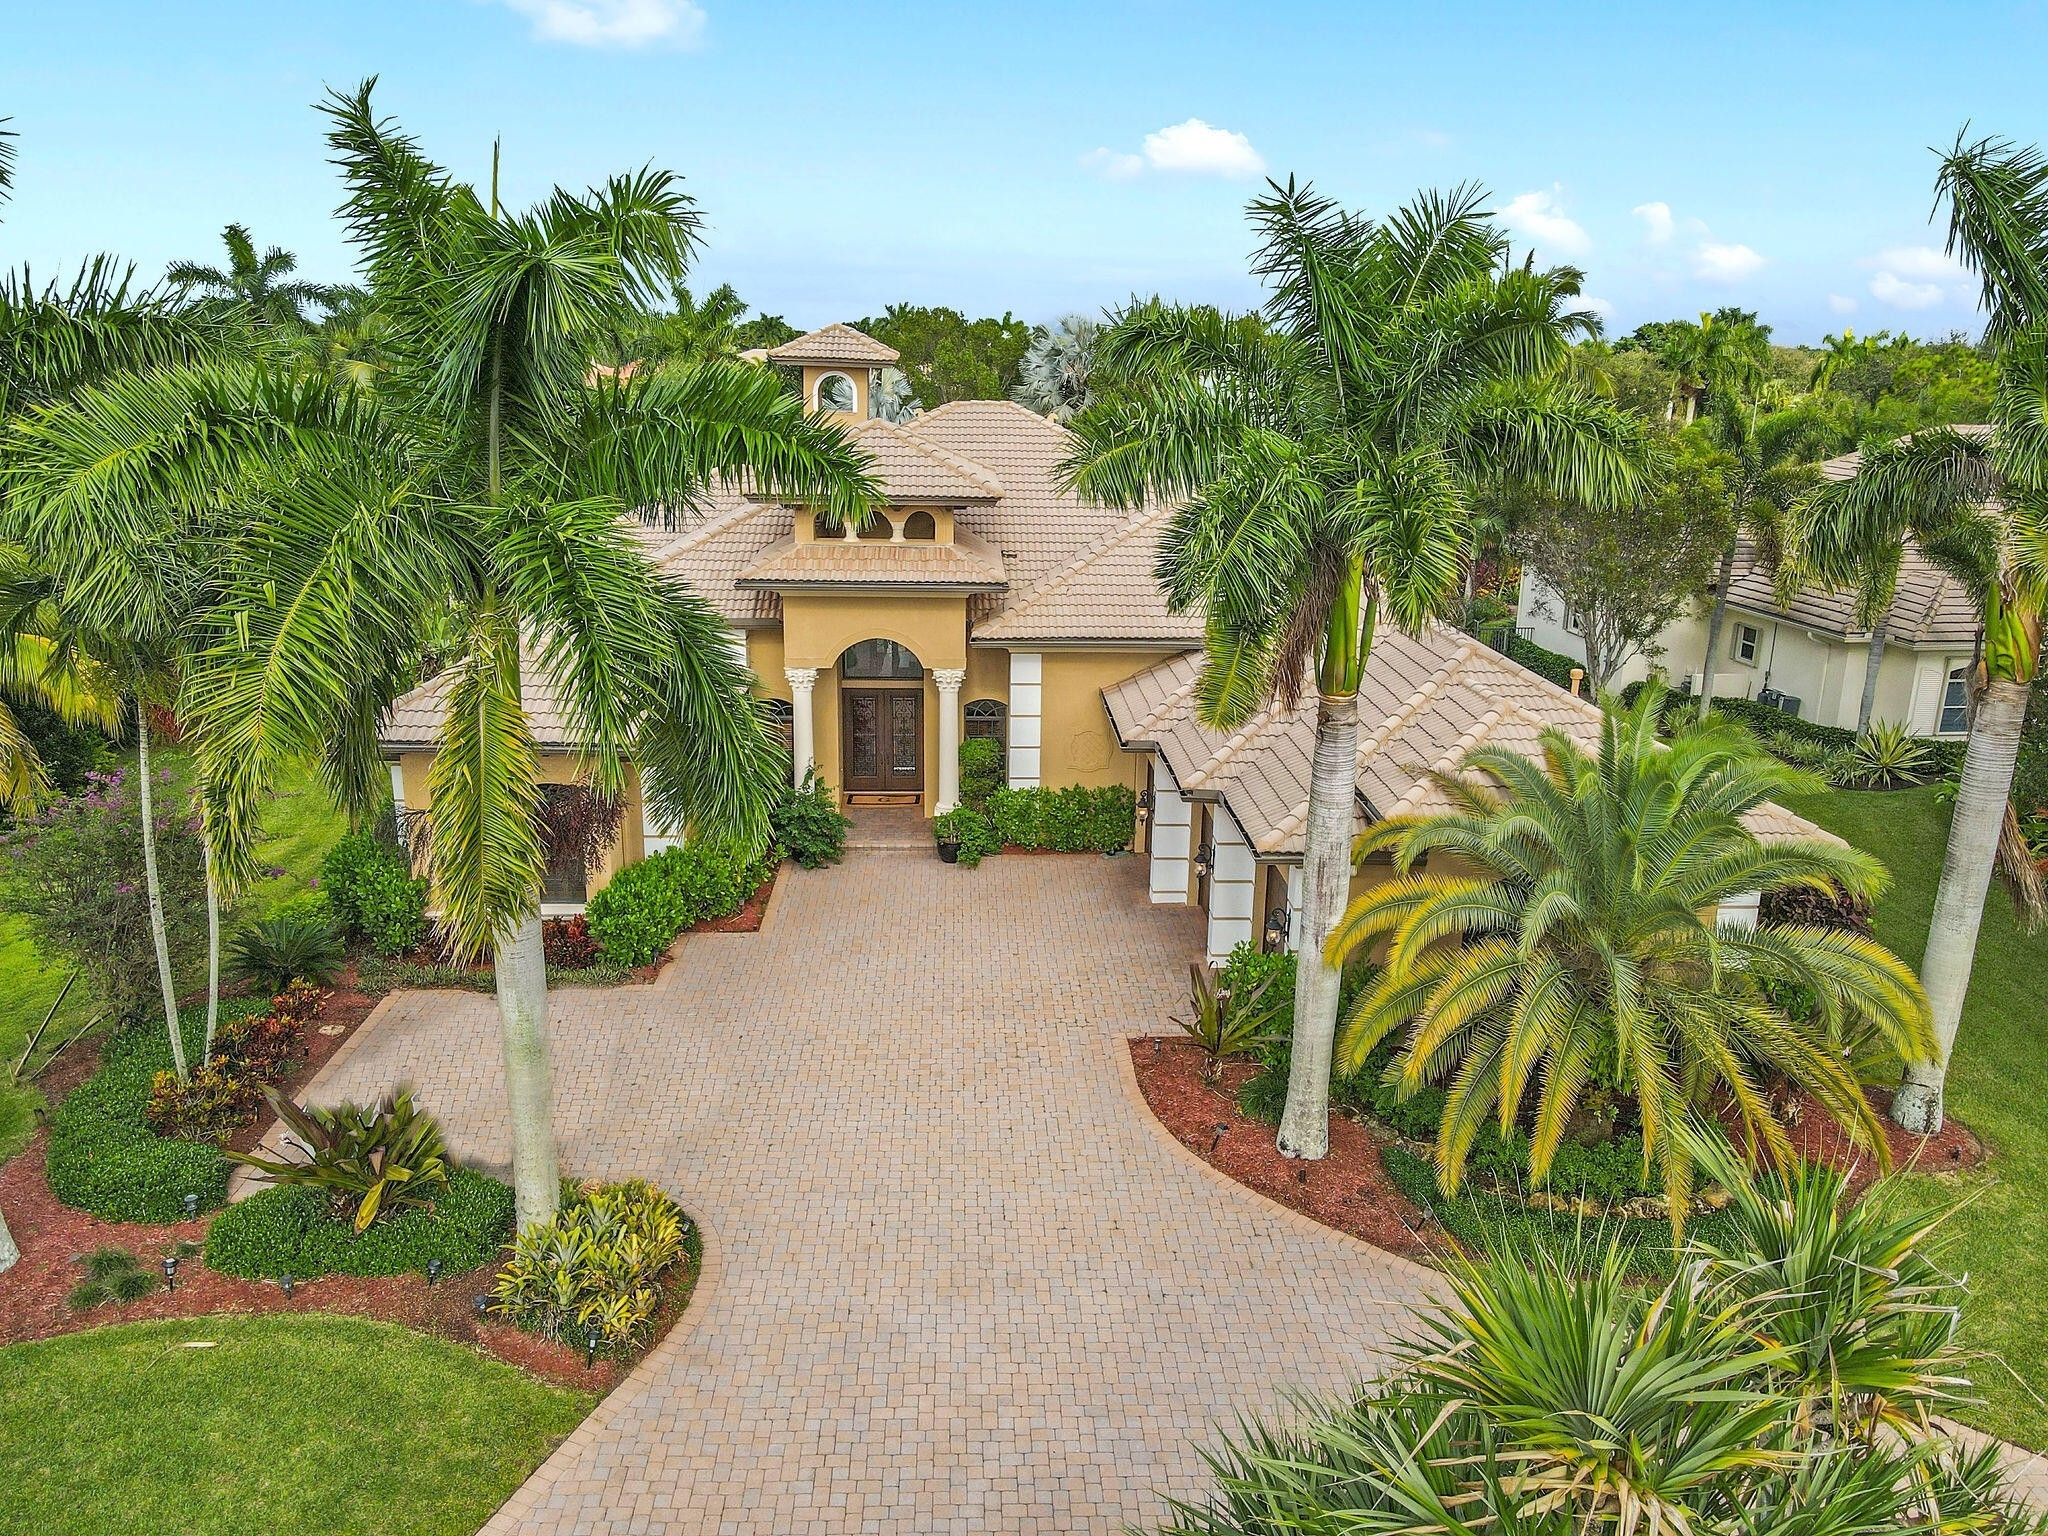 Single Family Home for Sale at Ibis Golf and Country Club, West Palm Beach, FL 33412